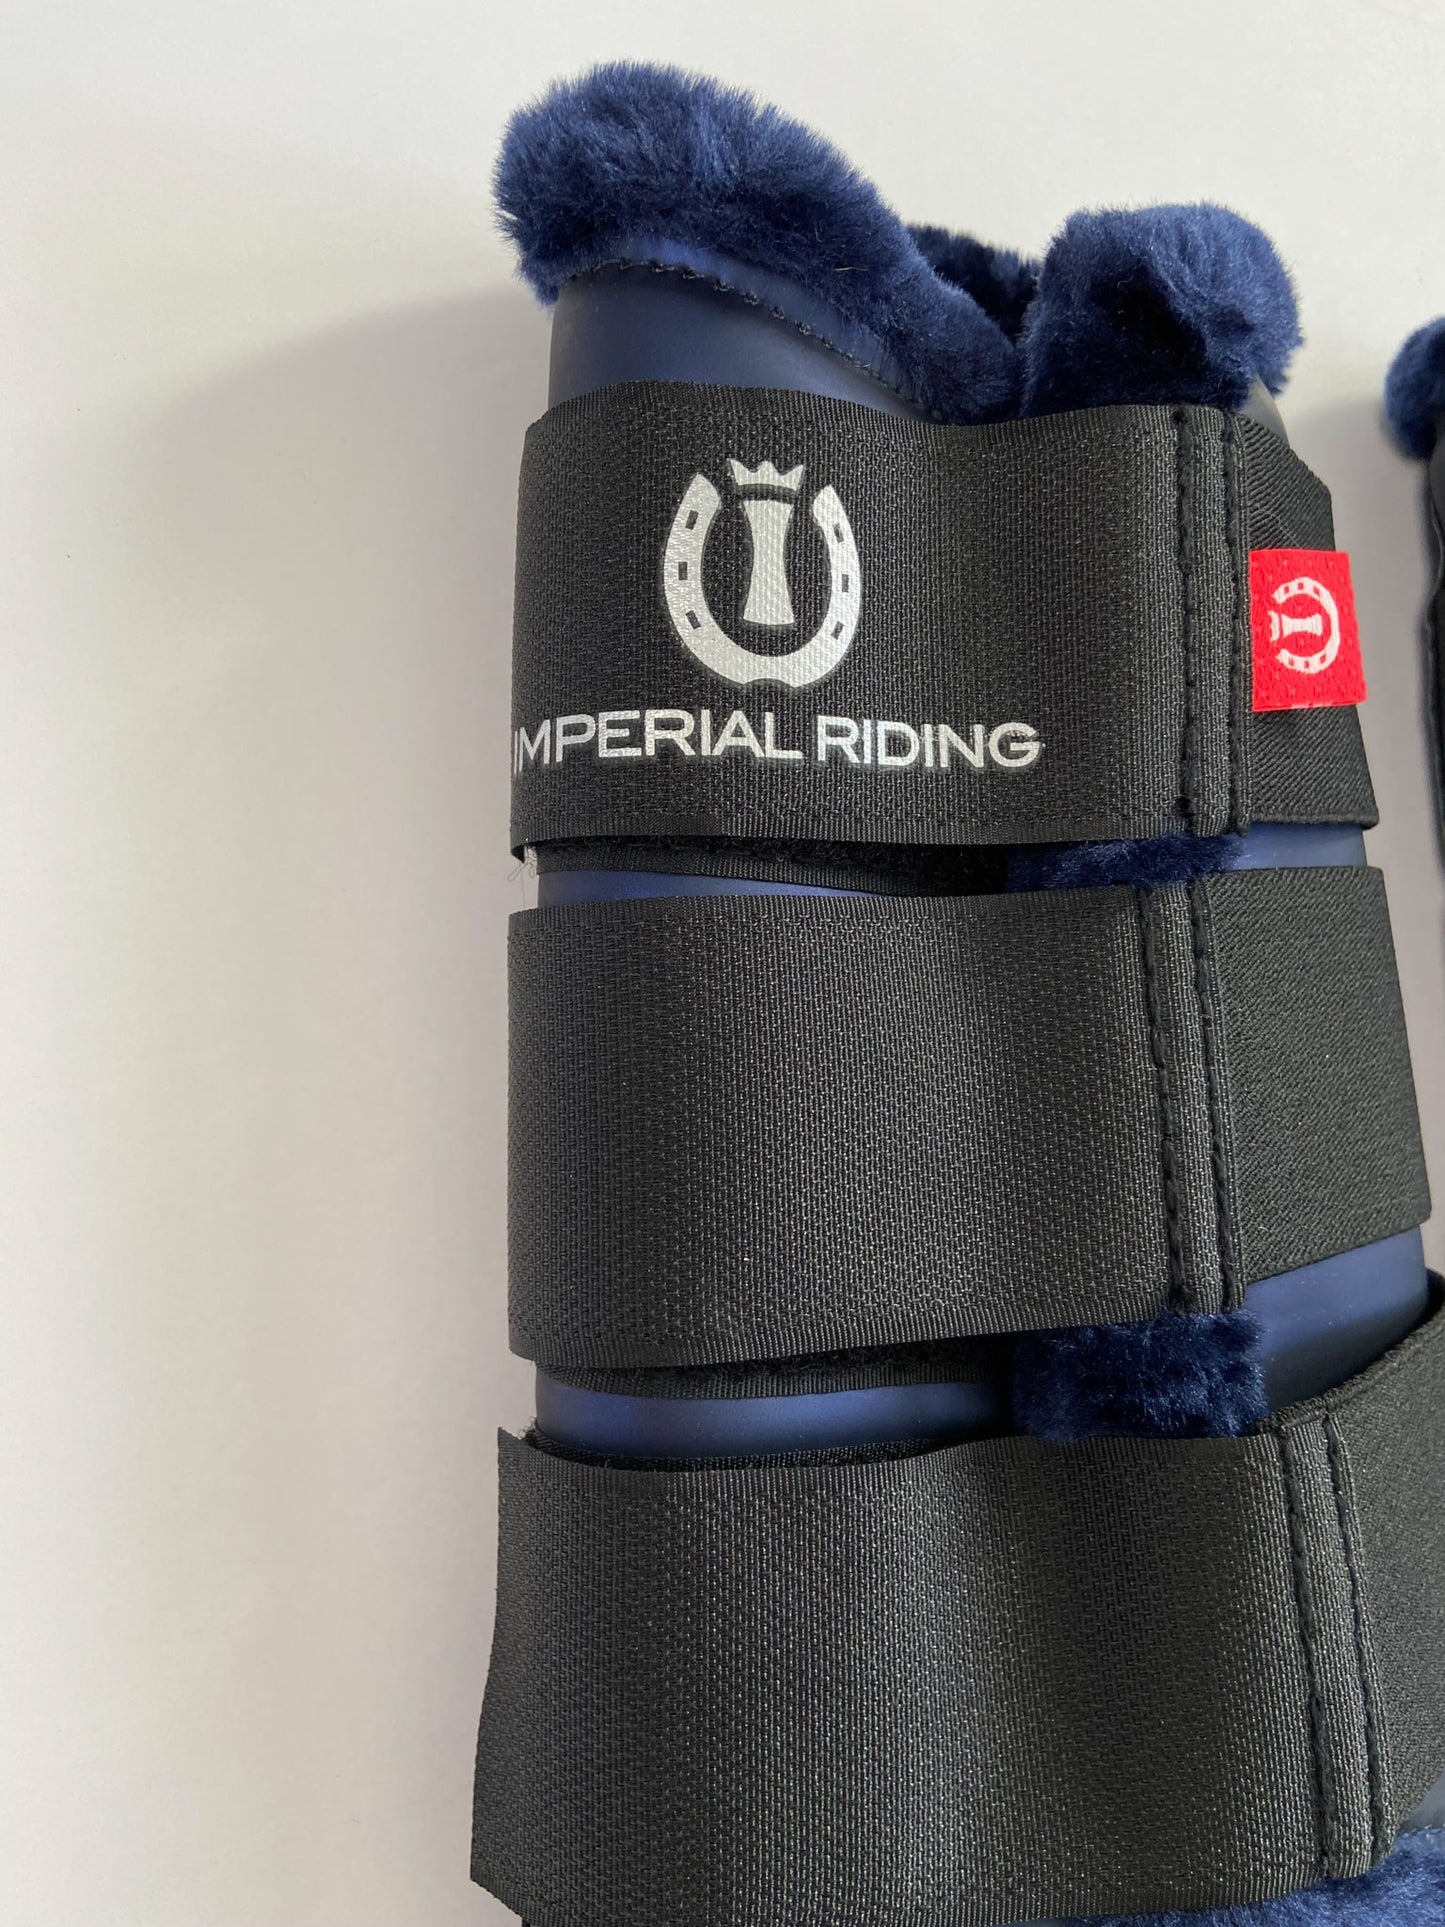 Imperial Riding Brush Boots - Navy - Full